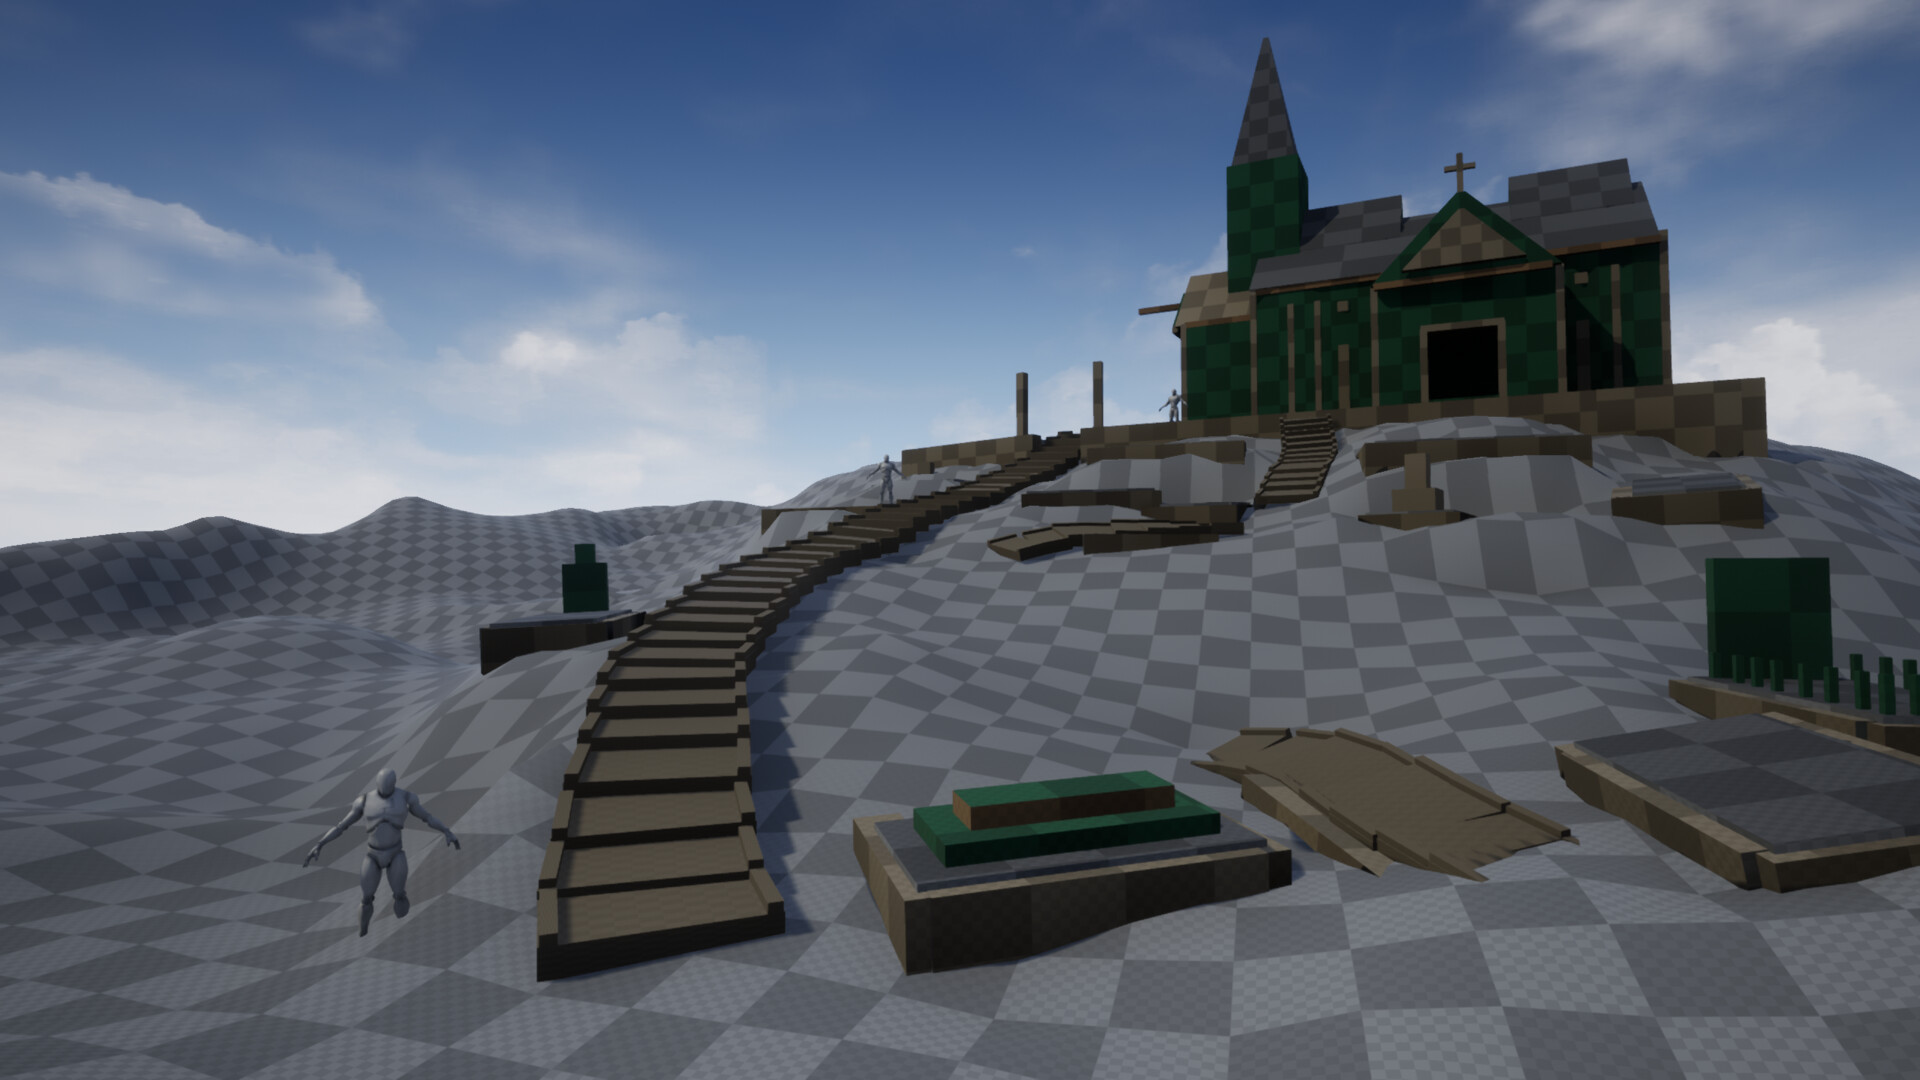 Early screenshot image from Unreal Engine 4. Most of the image is taken by gray, placeholder checkerboard landscape. That land forms a little hill that steps lead to. On top of the hill is a blockout of a small chapel in green and warm gray material placeholders. 